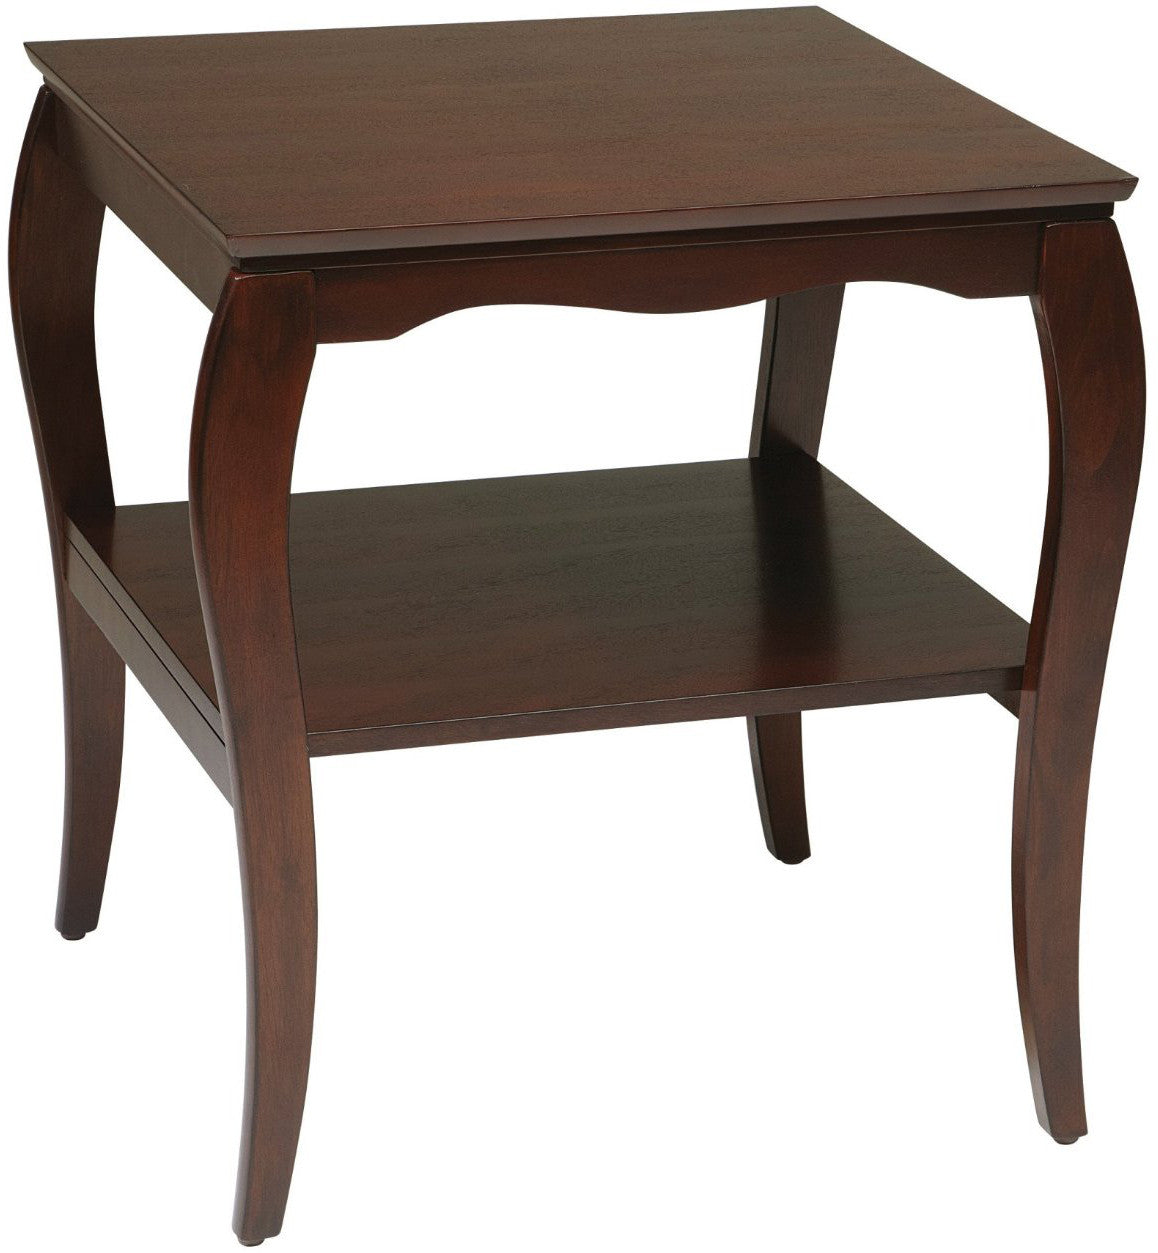 Work Smart / Osp Designs Bn09chy End Table In Cherry Finish